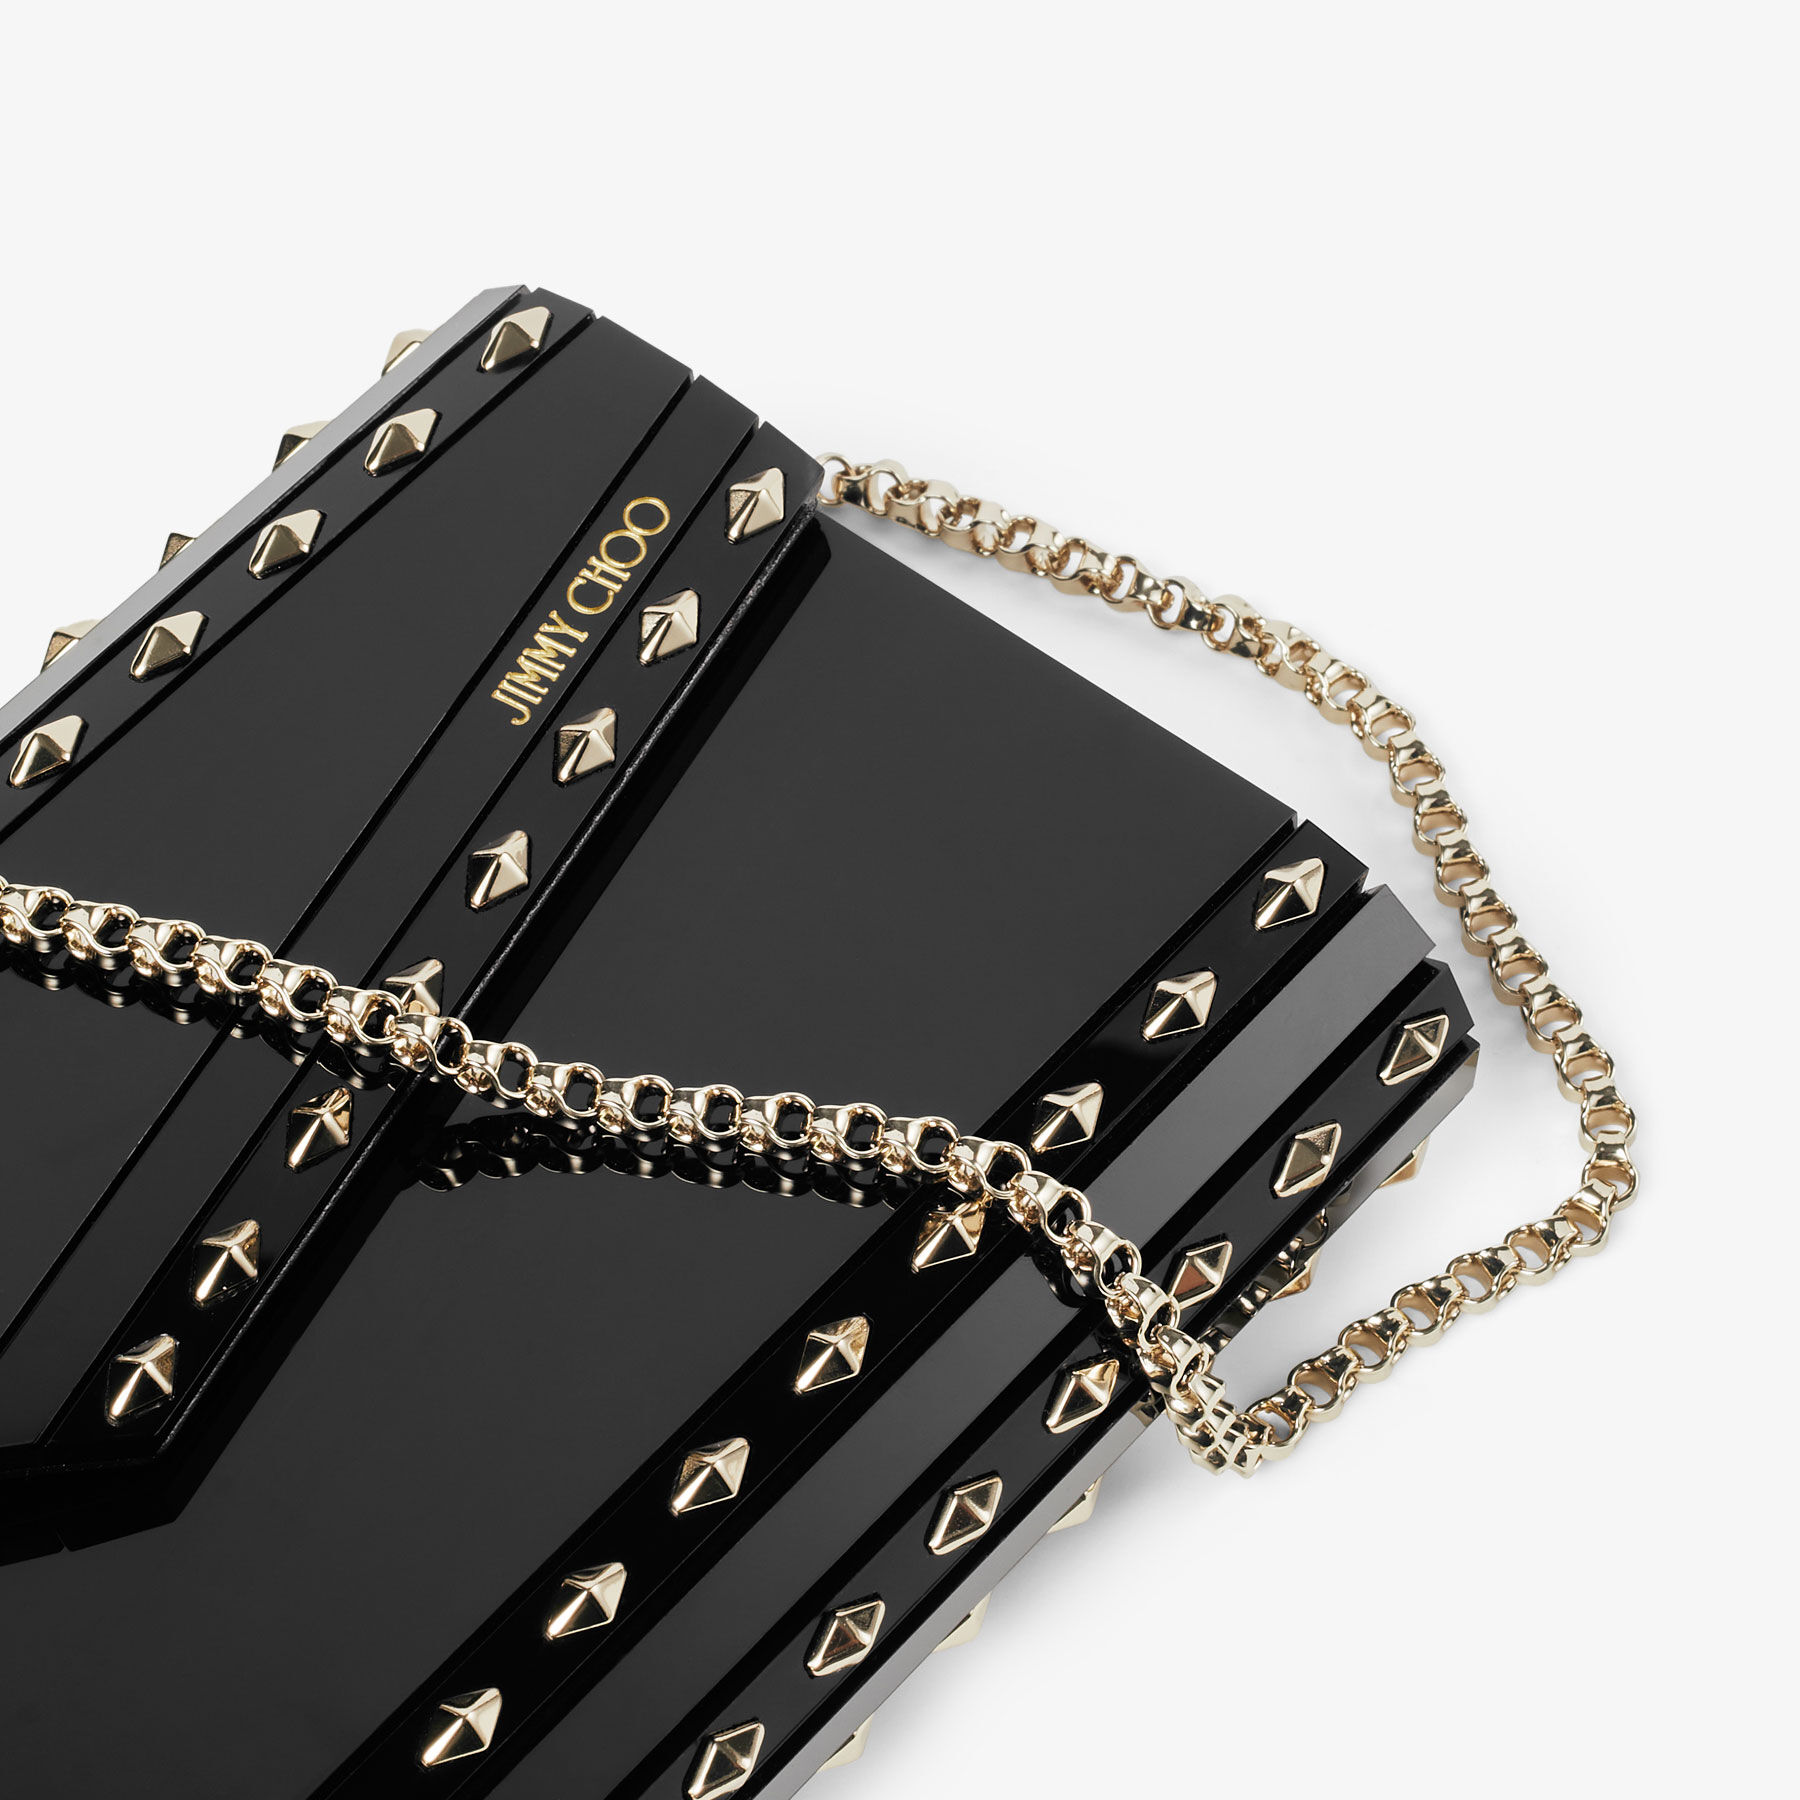 CANDY | Black Acrylic Clutch Bag with Studs | Summer Collection 